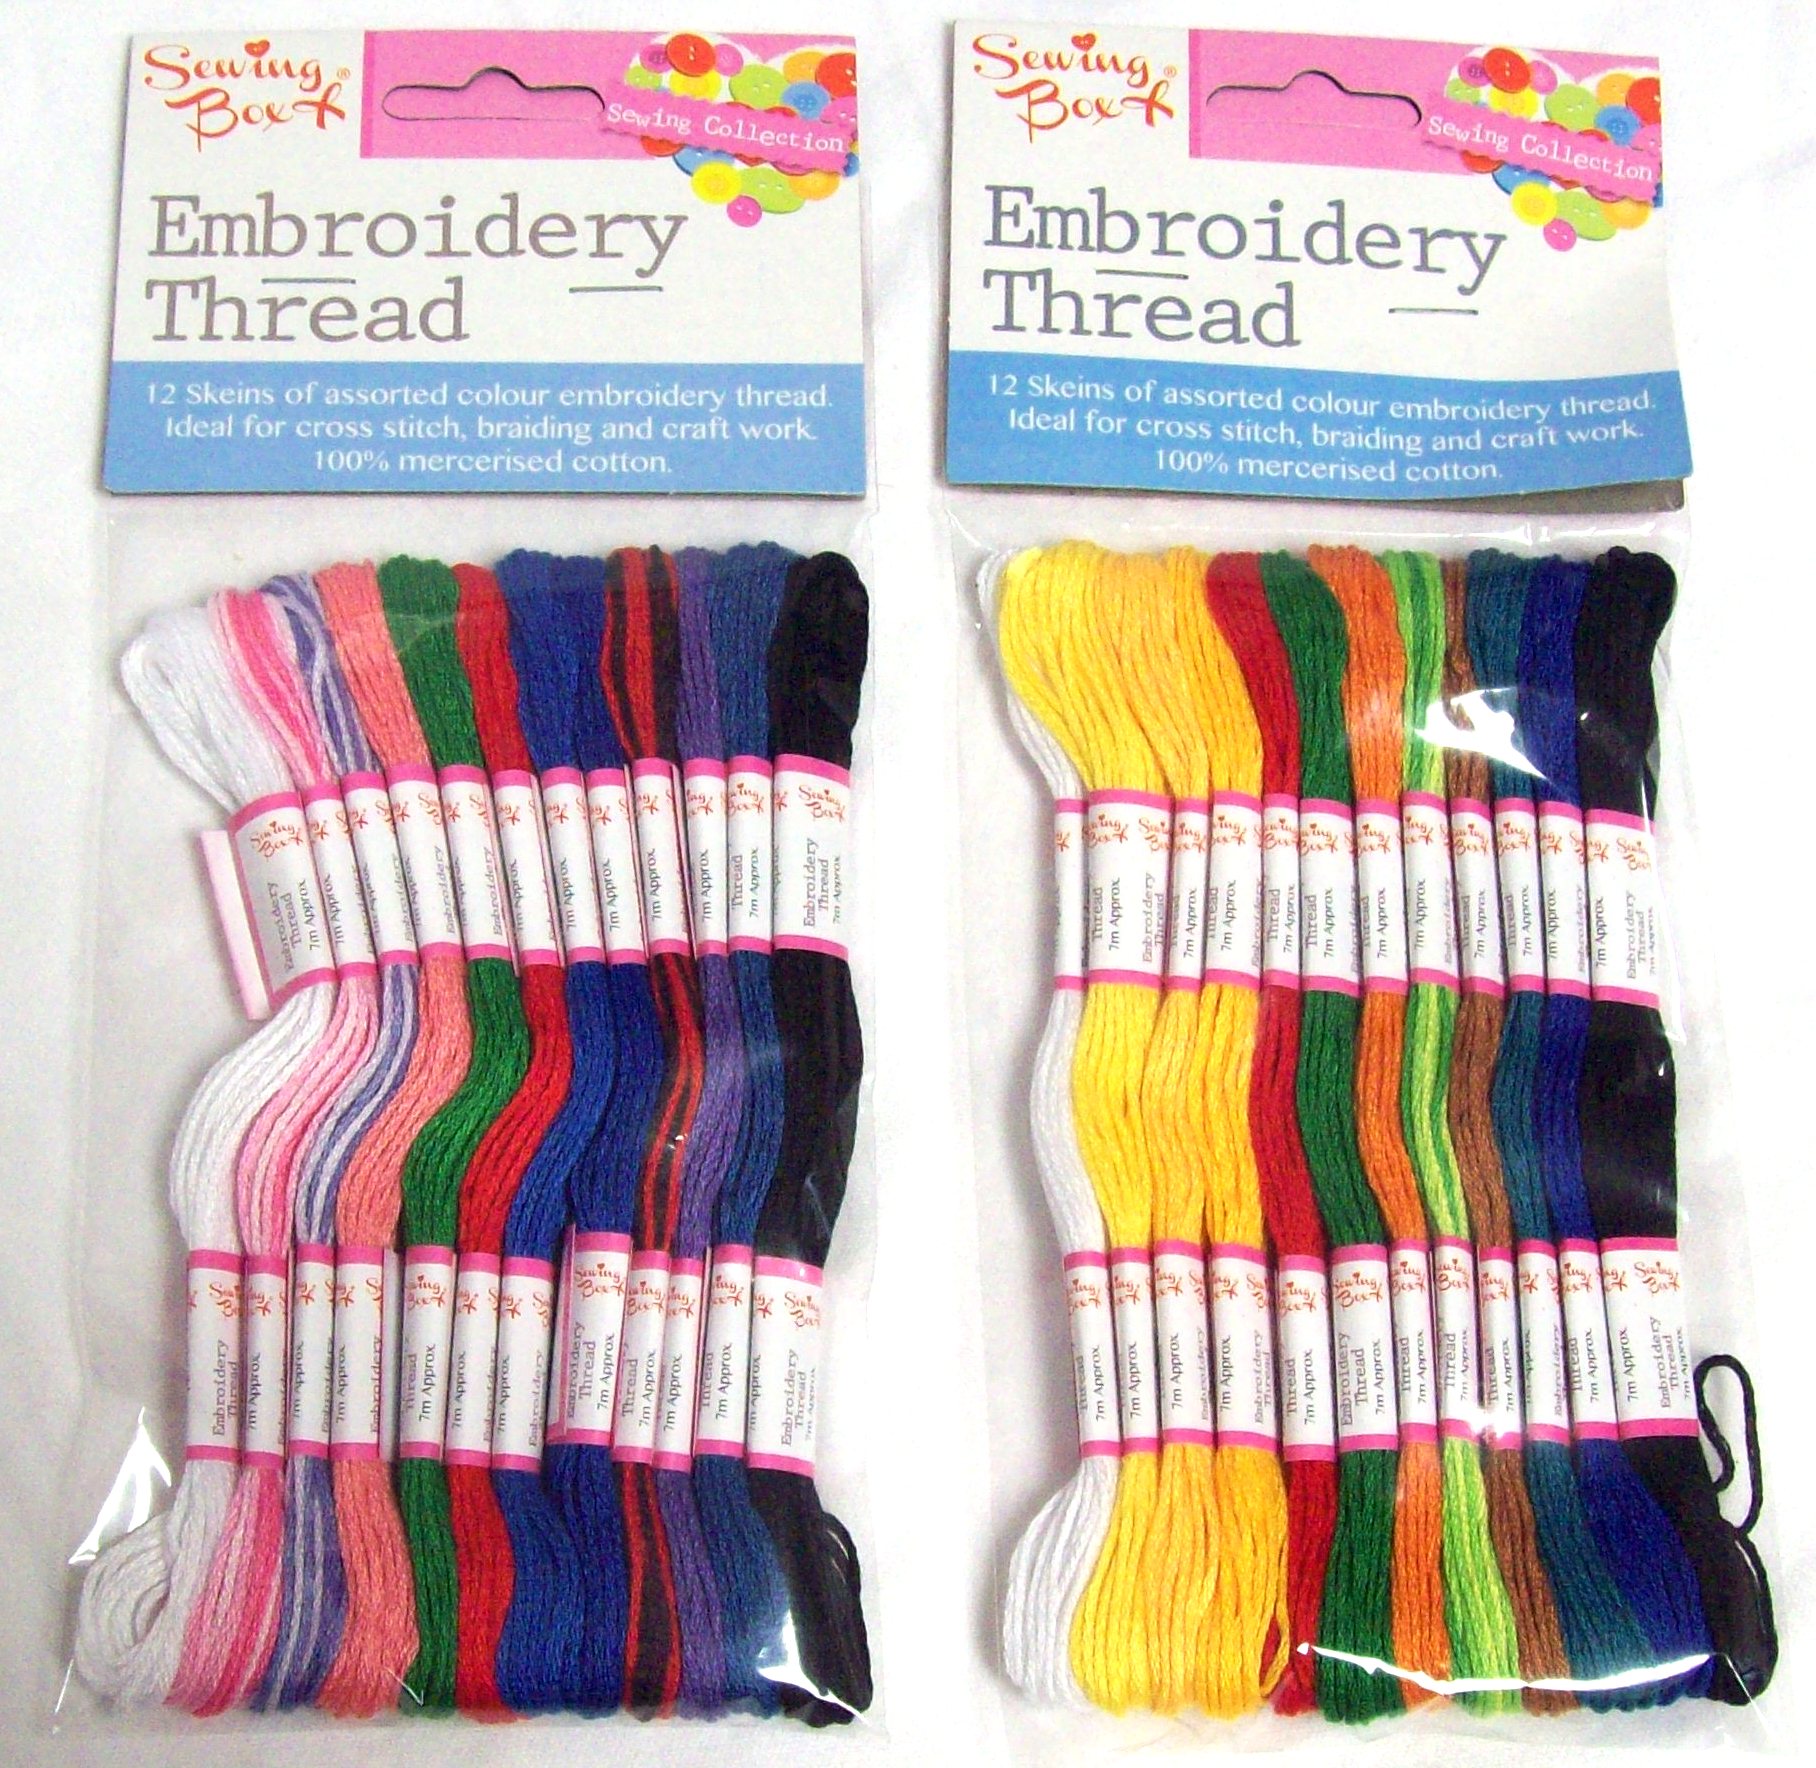 Skeins Of Assorted Colour Embroidery Thread Pale & Dark 100% Cotton Sewing